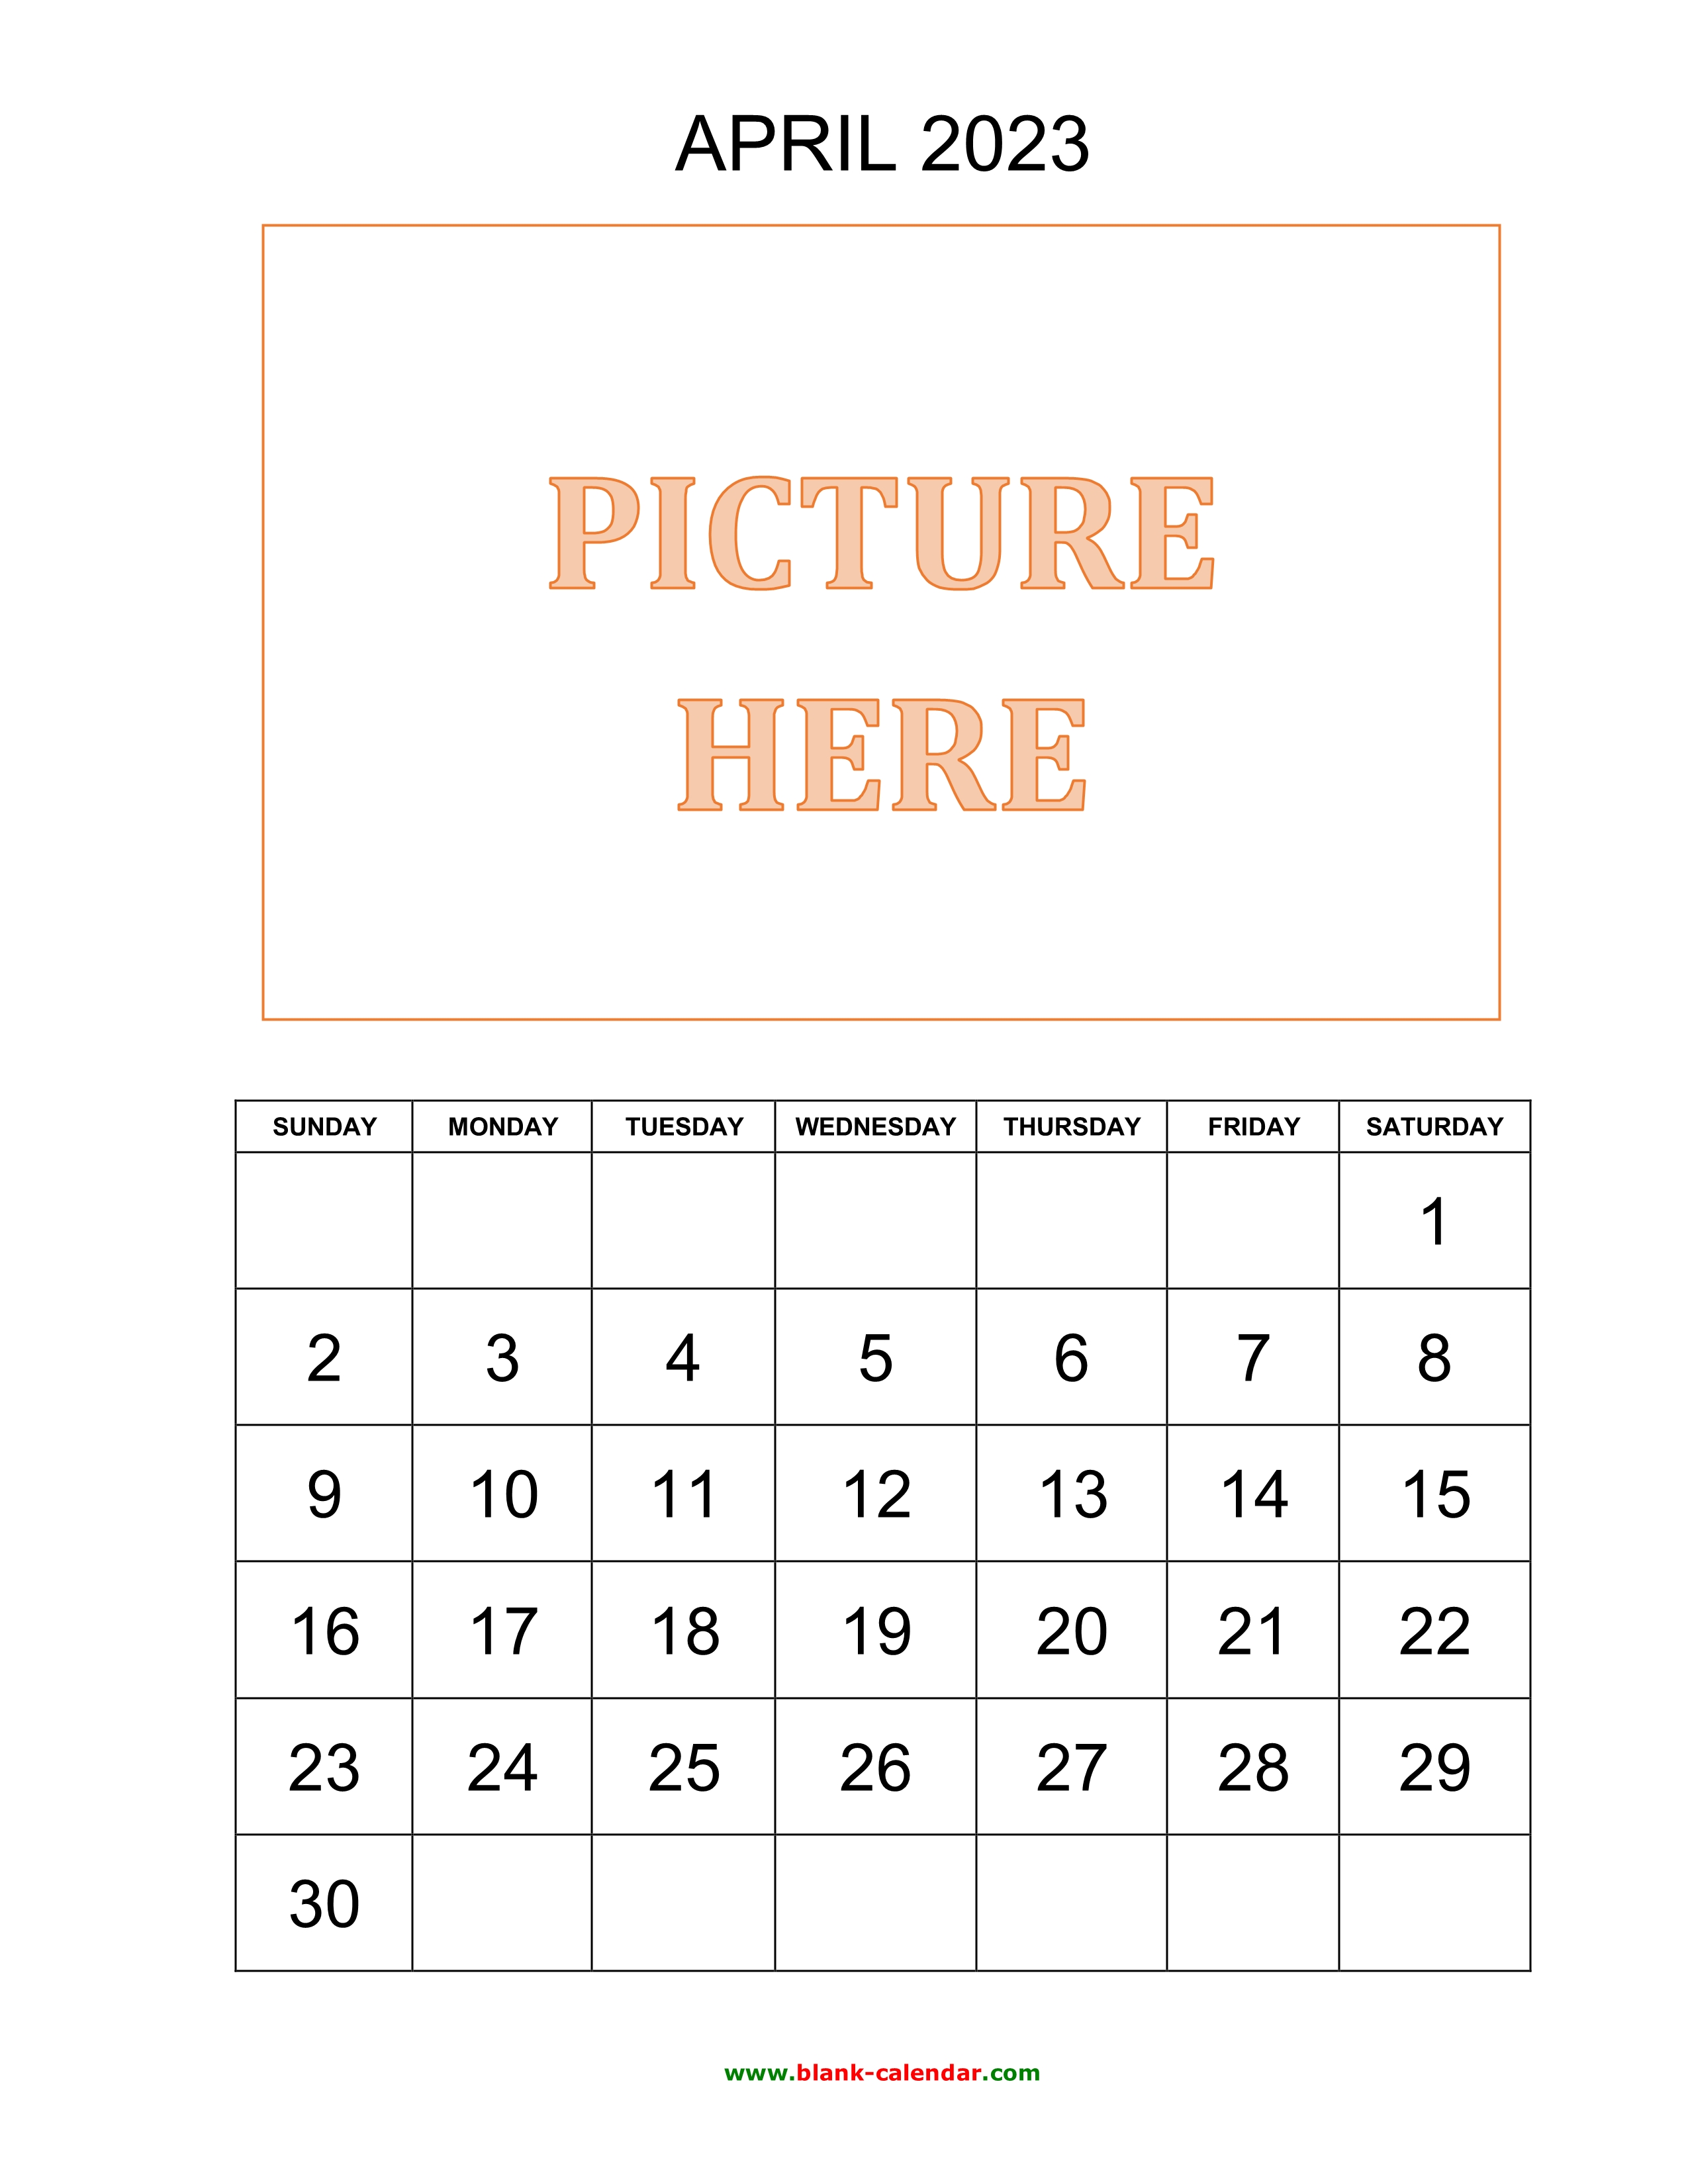 Free Download Printable April 2023 Calendar, picture can be placed